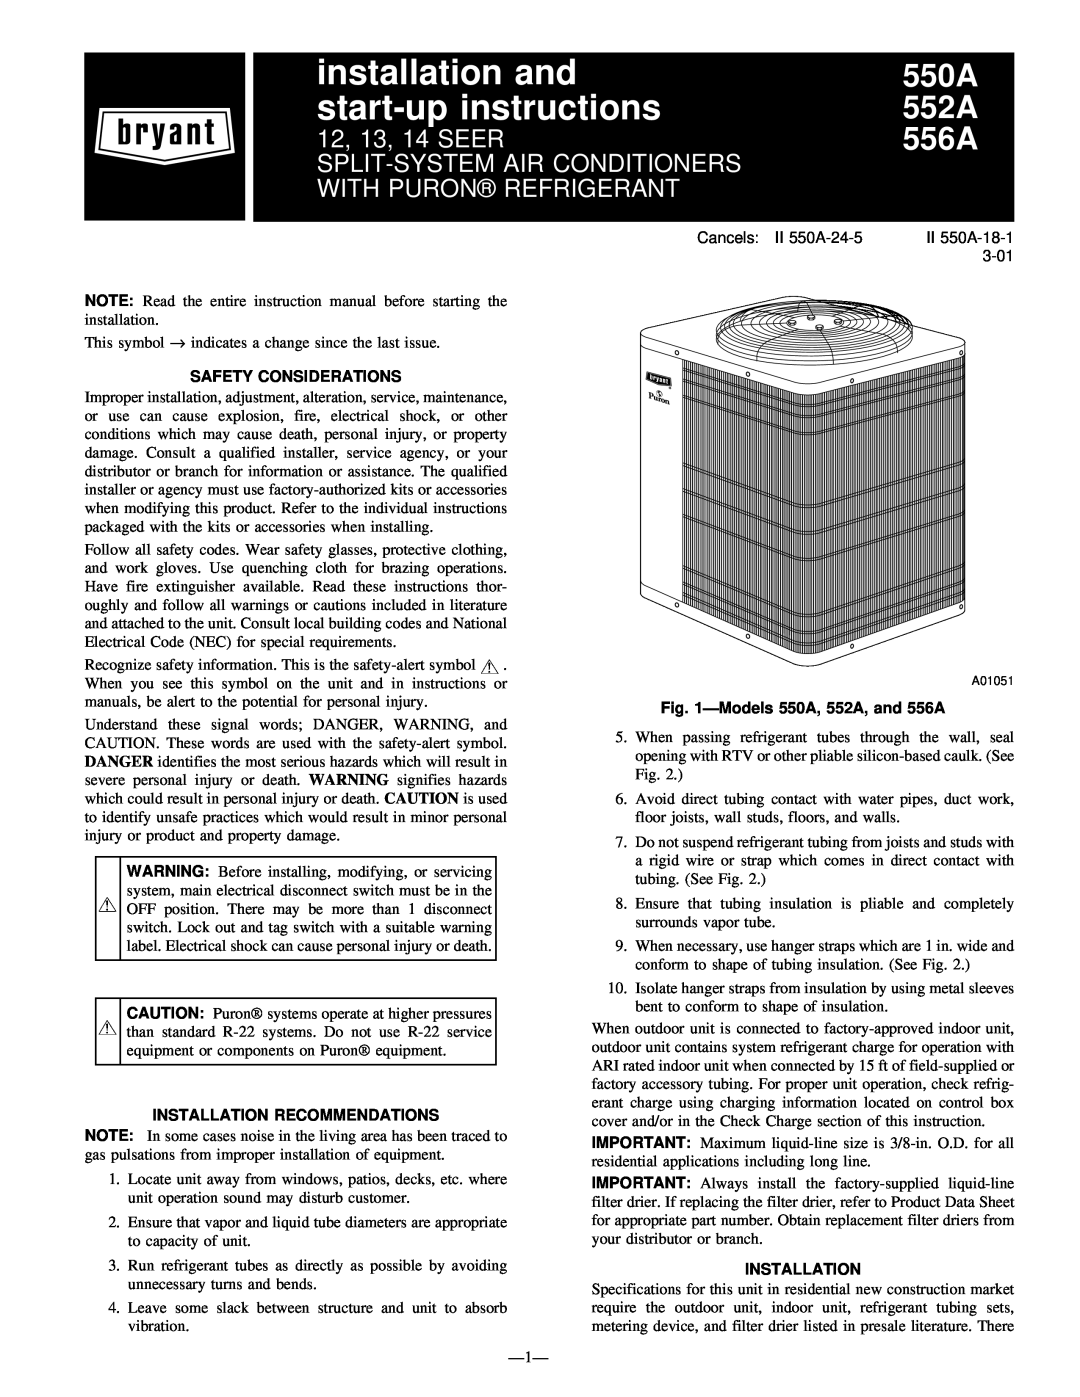 Bryant 556A warranty preliminary product fact sheet, Seer Split-System, Features, Limited Warranty 